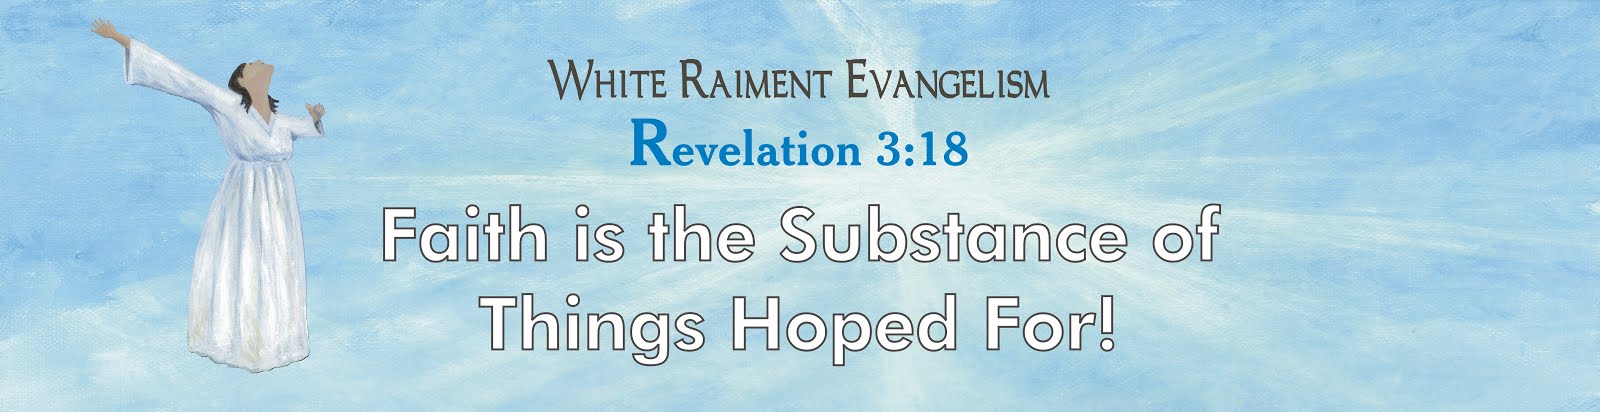 White Raiment Evangelism: Faith is the Substance of Things Hoped For